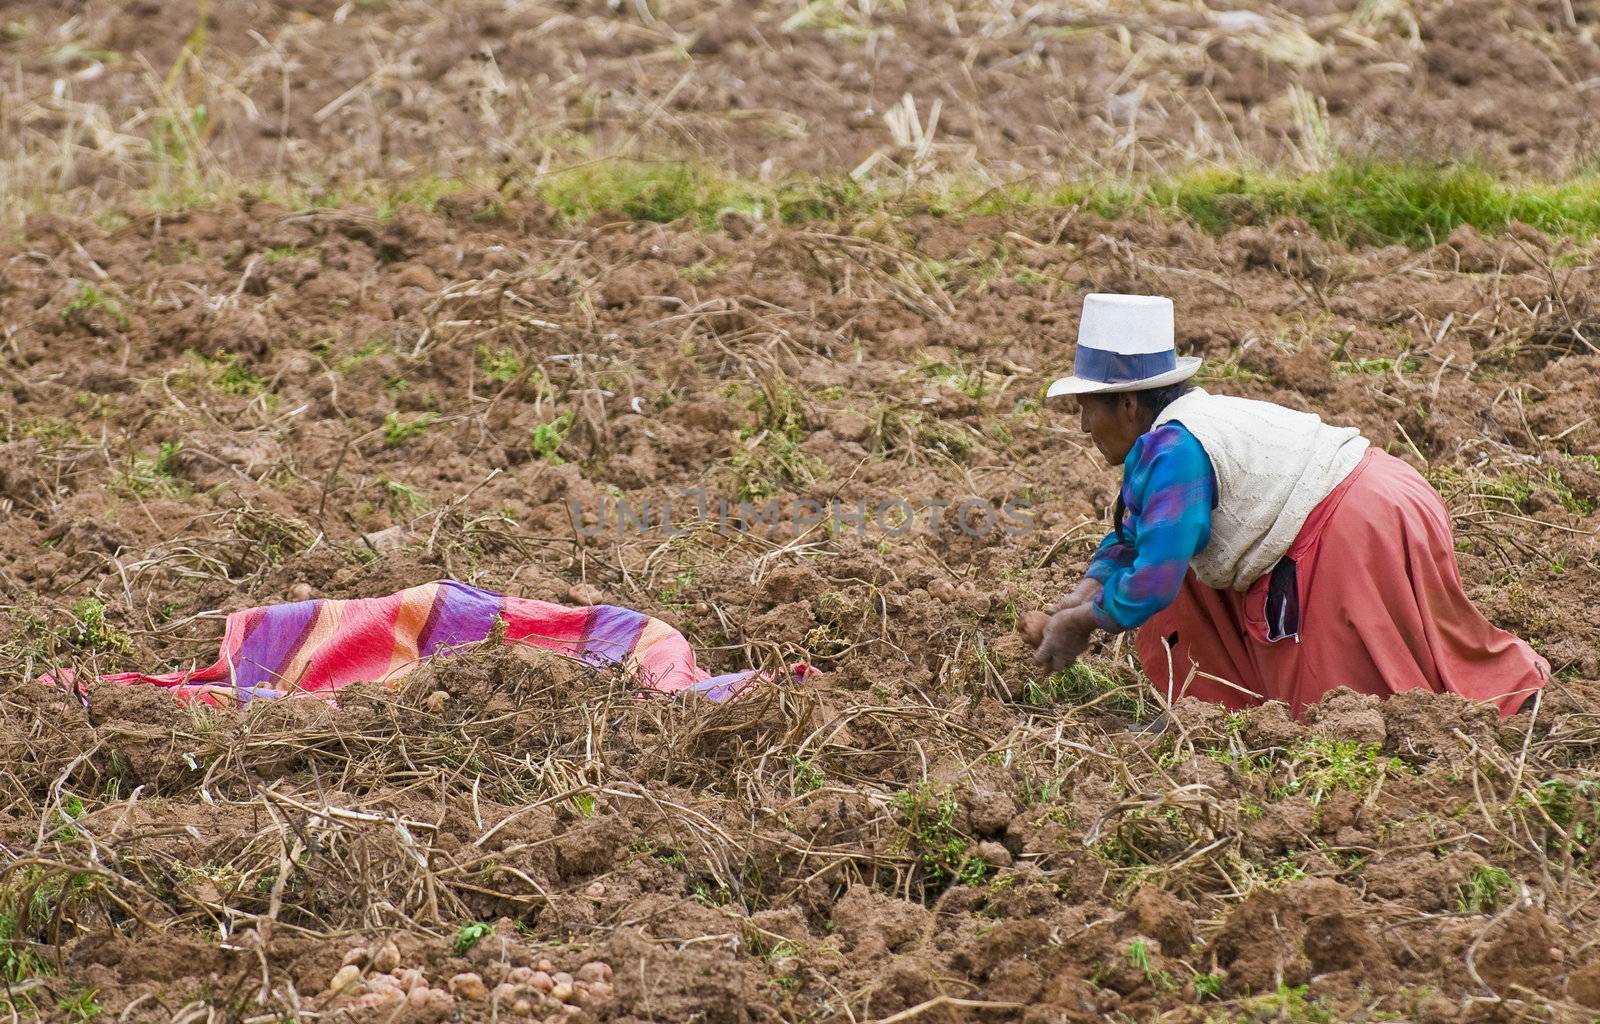 SACRED VALLEY,  PERU - MAY 26 : Peruvian woman in a potato harvest in the Andes of Peru